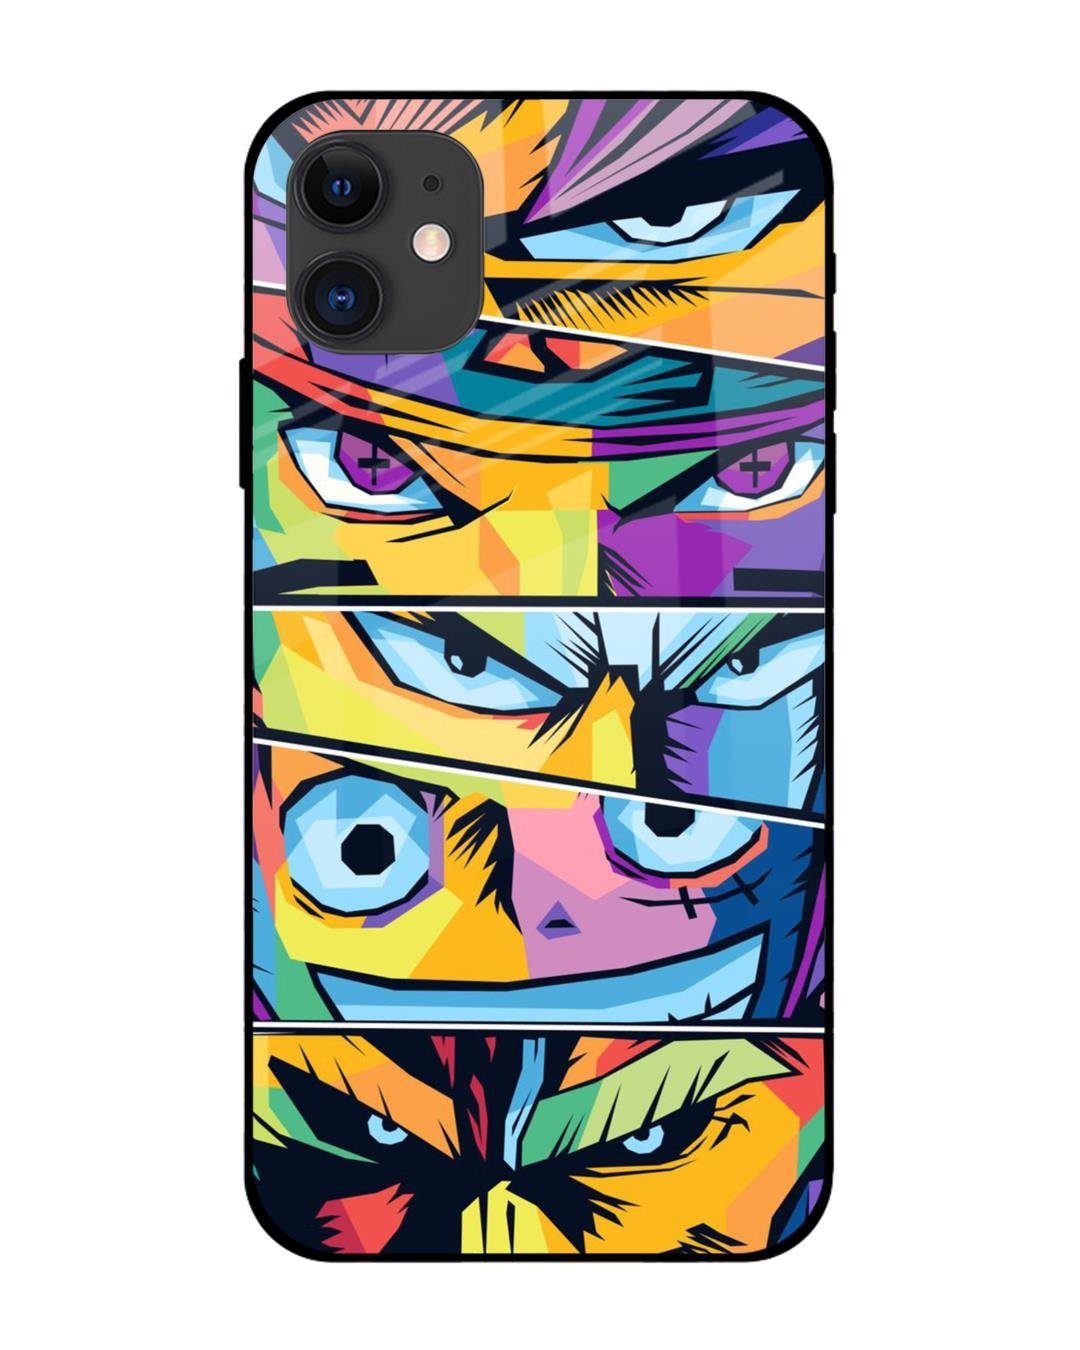 Naruto Anime Sunset Art Glass Back Case for iPhone 12 Mini  Mobile Phone  Covers  Cases in India Online at CoversCartcom